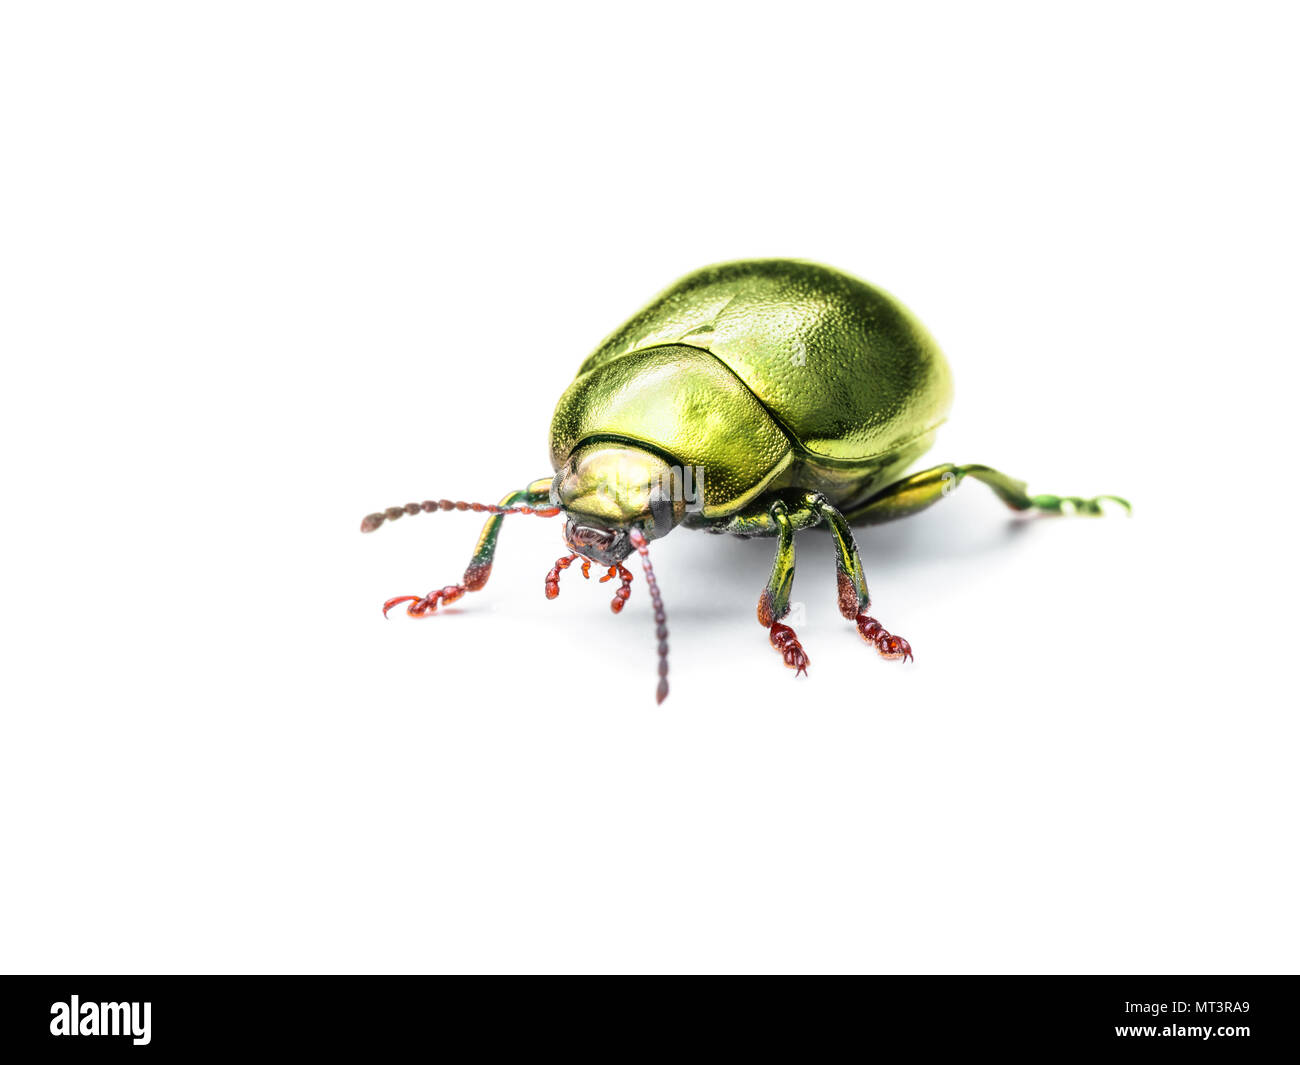 Chrysolina Coerulans Golden Yellow Mint Leaf Beetle Insect Macro Isolated on White Stock Photo